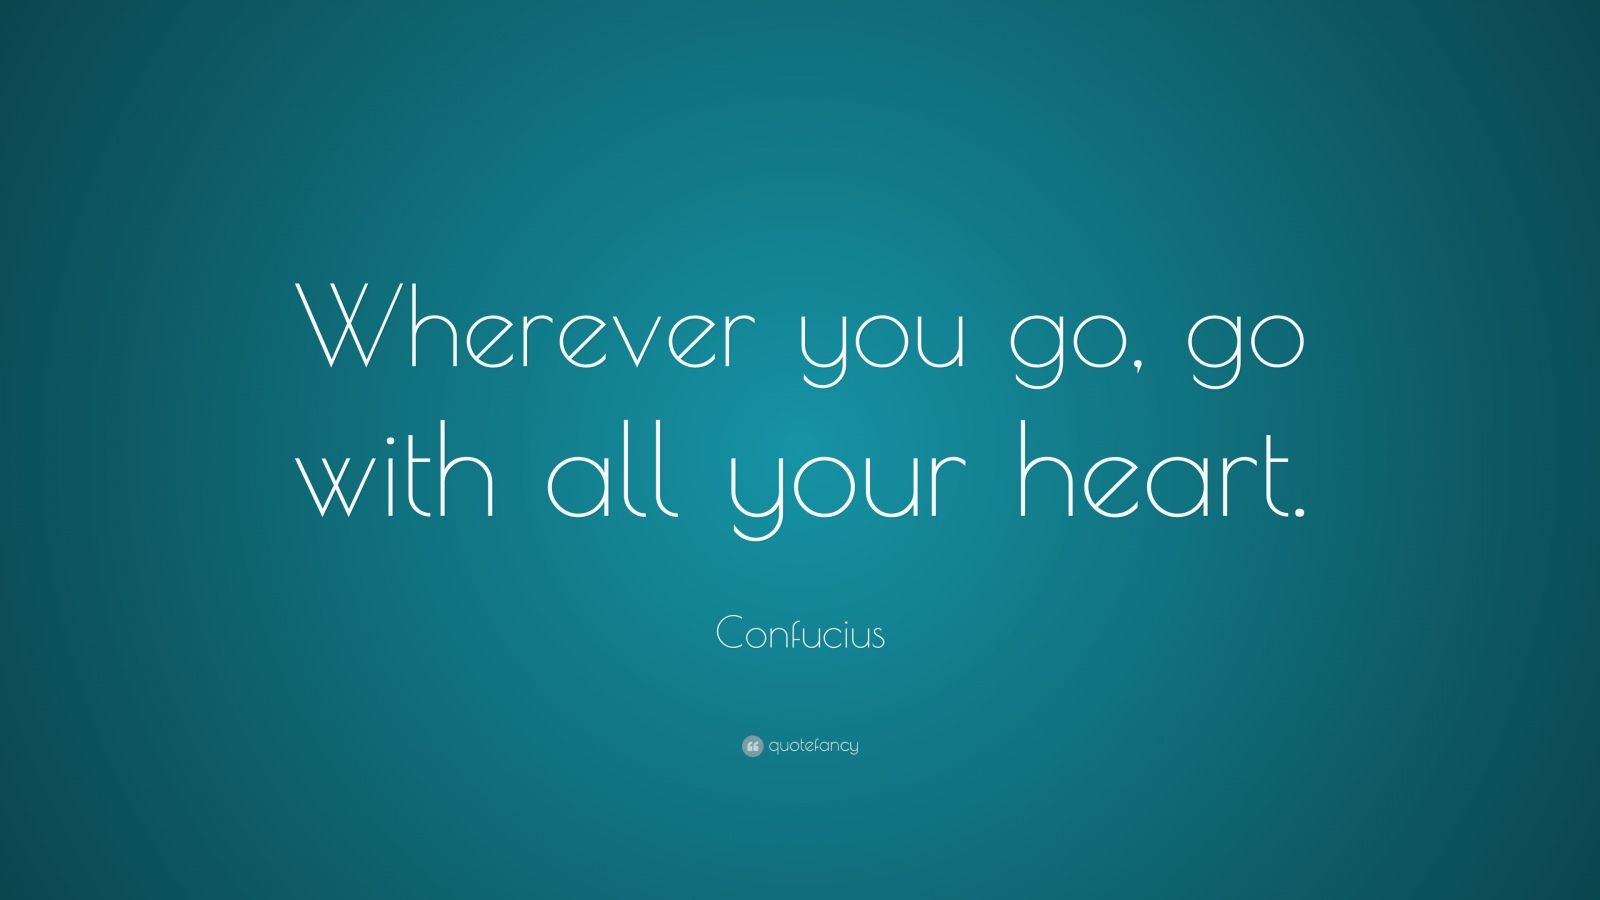 Confucius Quote: “Wherever you go, go with all your heart.” (38